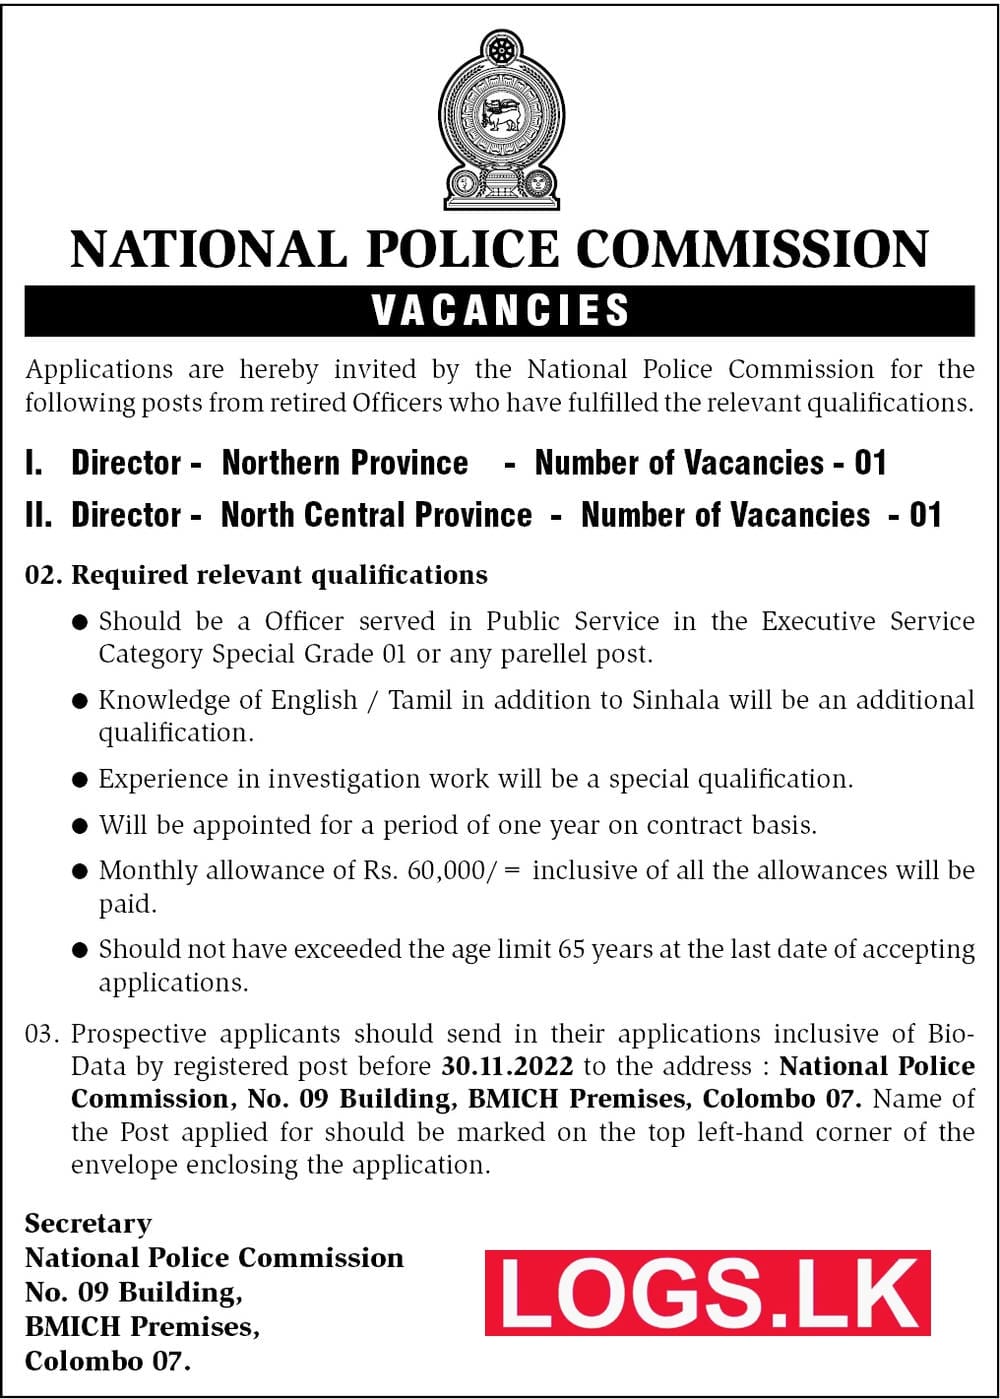 Director Job Vacancy in Northern Province National Police Commission Jobs Vacancies